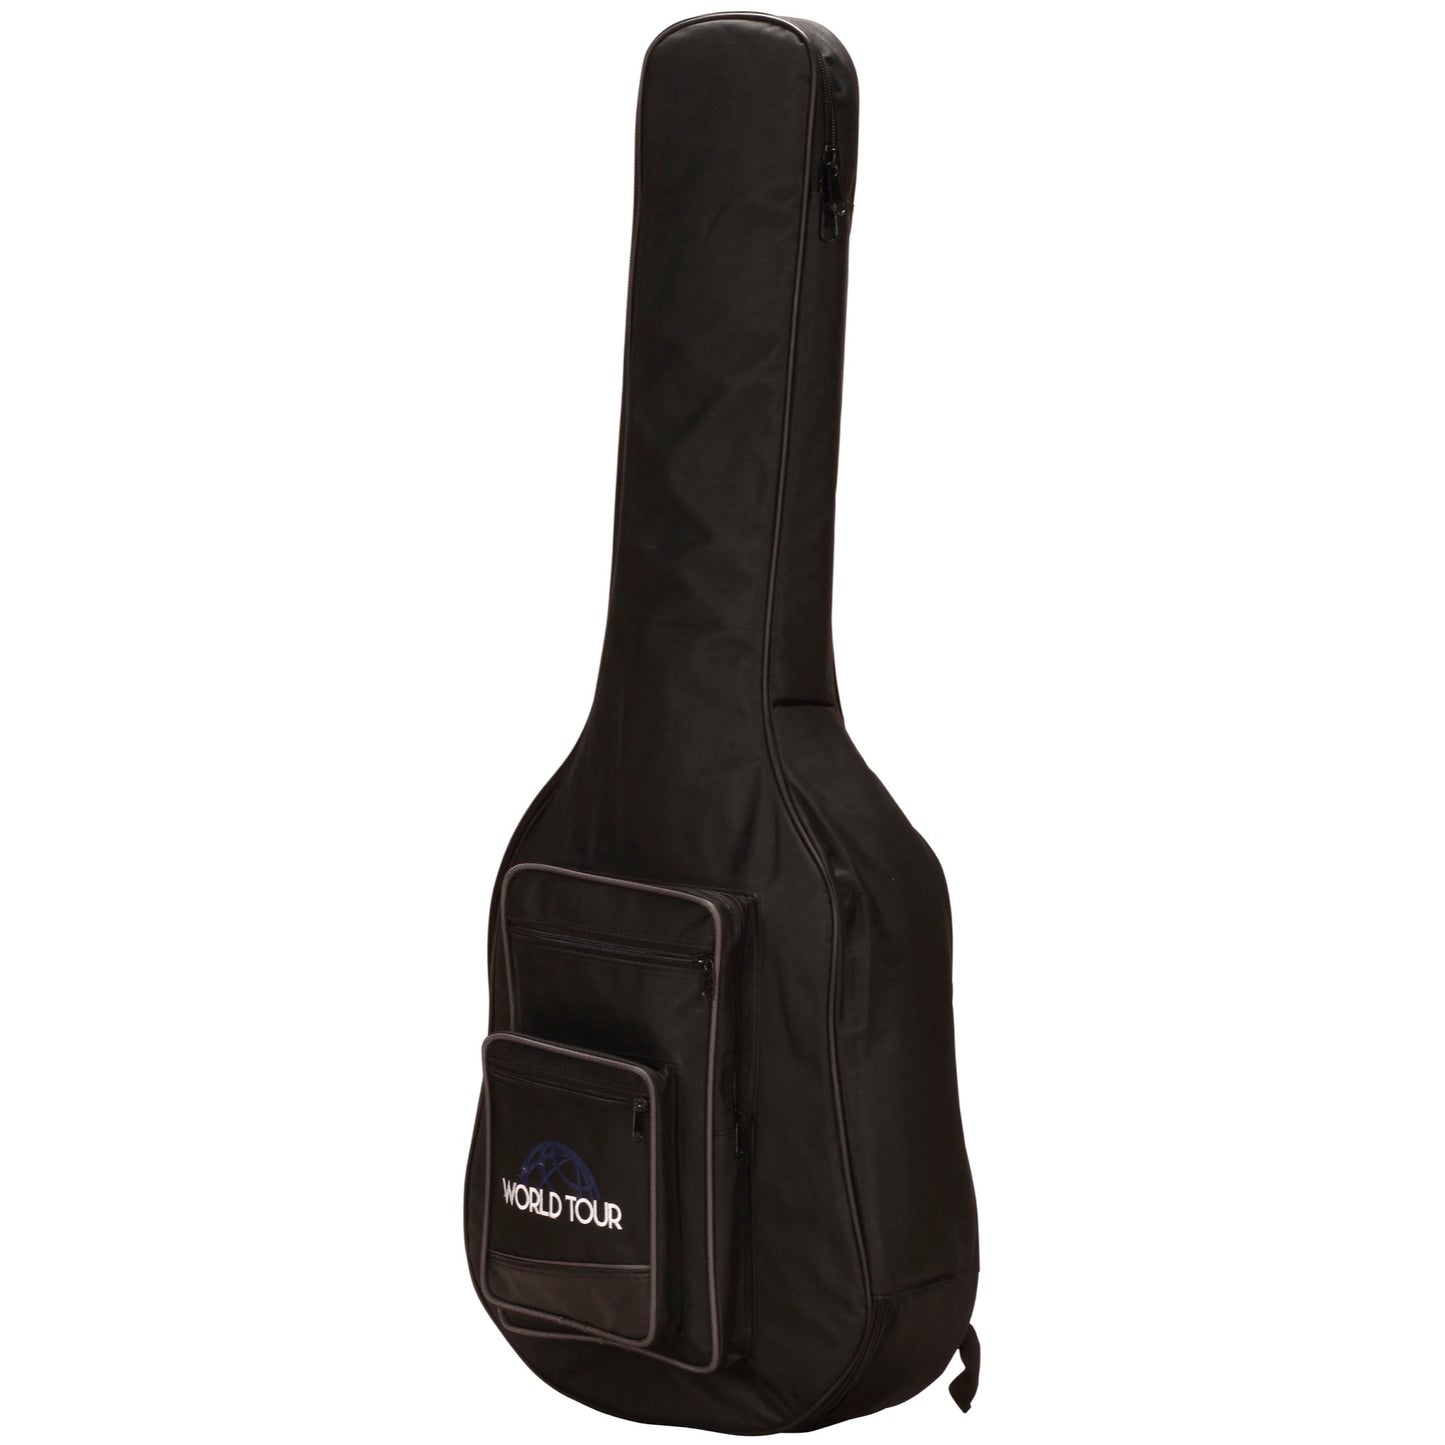 Deluxe Series Dreadnought Size Acoustic Guitar Gig Bag